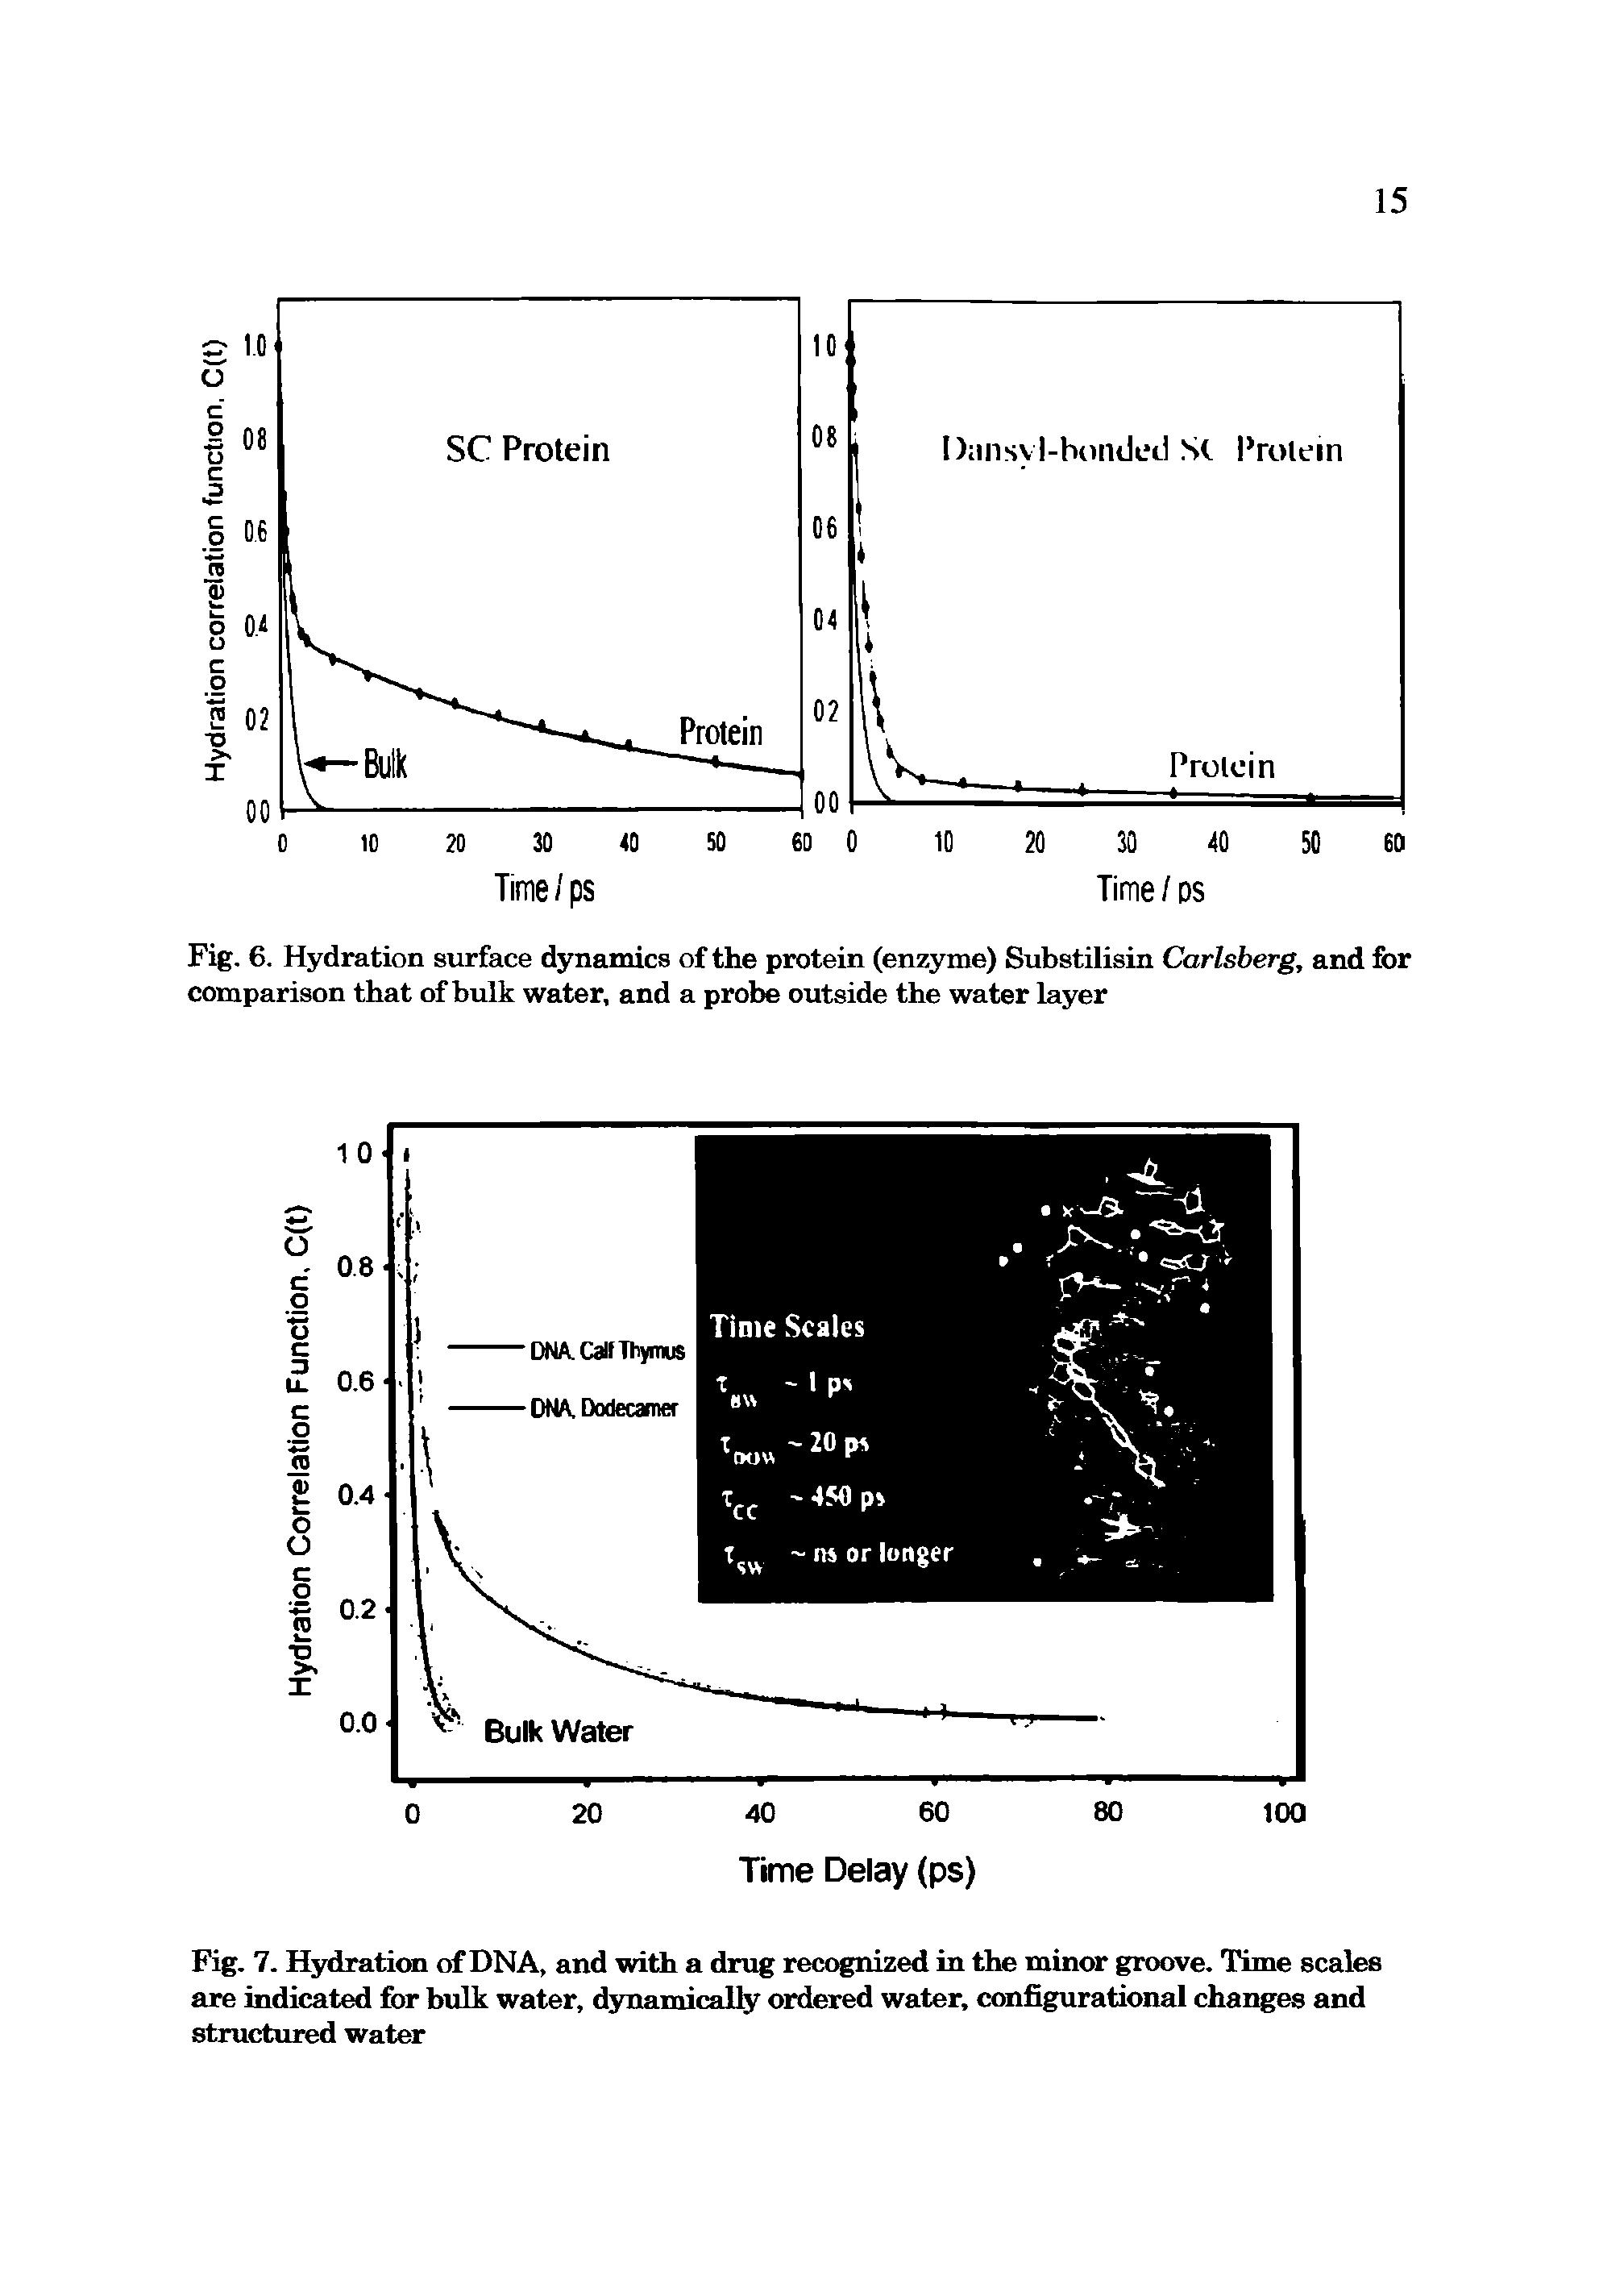 Fig. 7. Hydration of DNA, and with a drug recognized in the minor groove. Time scales are indicated for bulk water, dynamically ordered water, configurational changes and structured water...